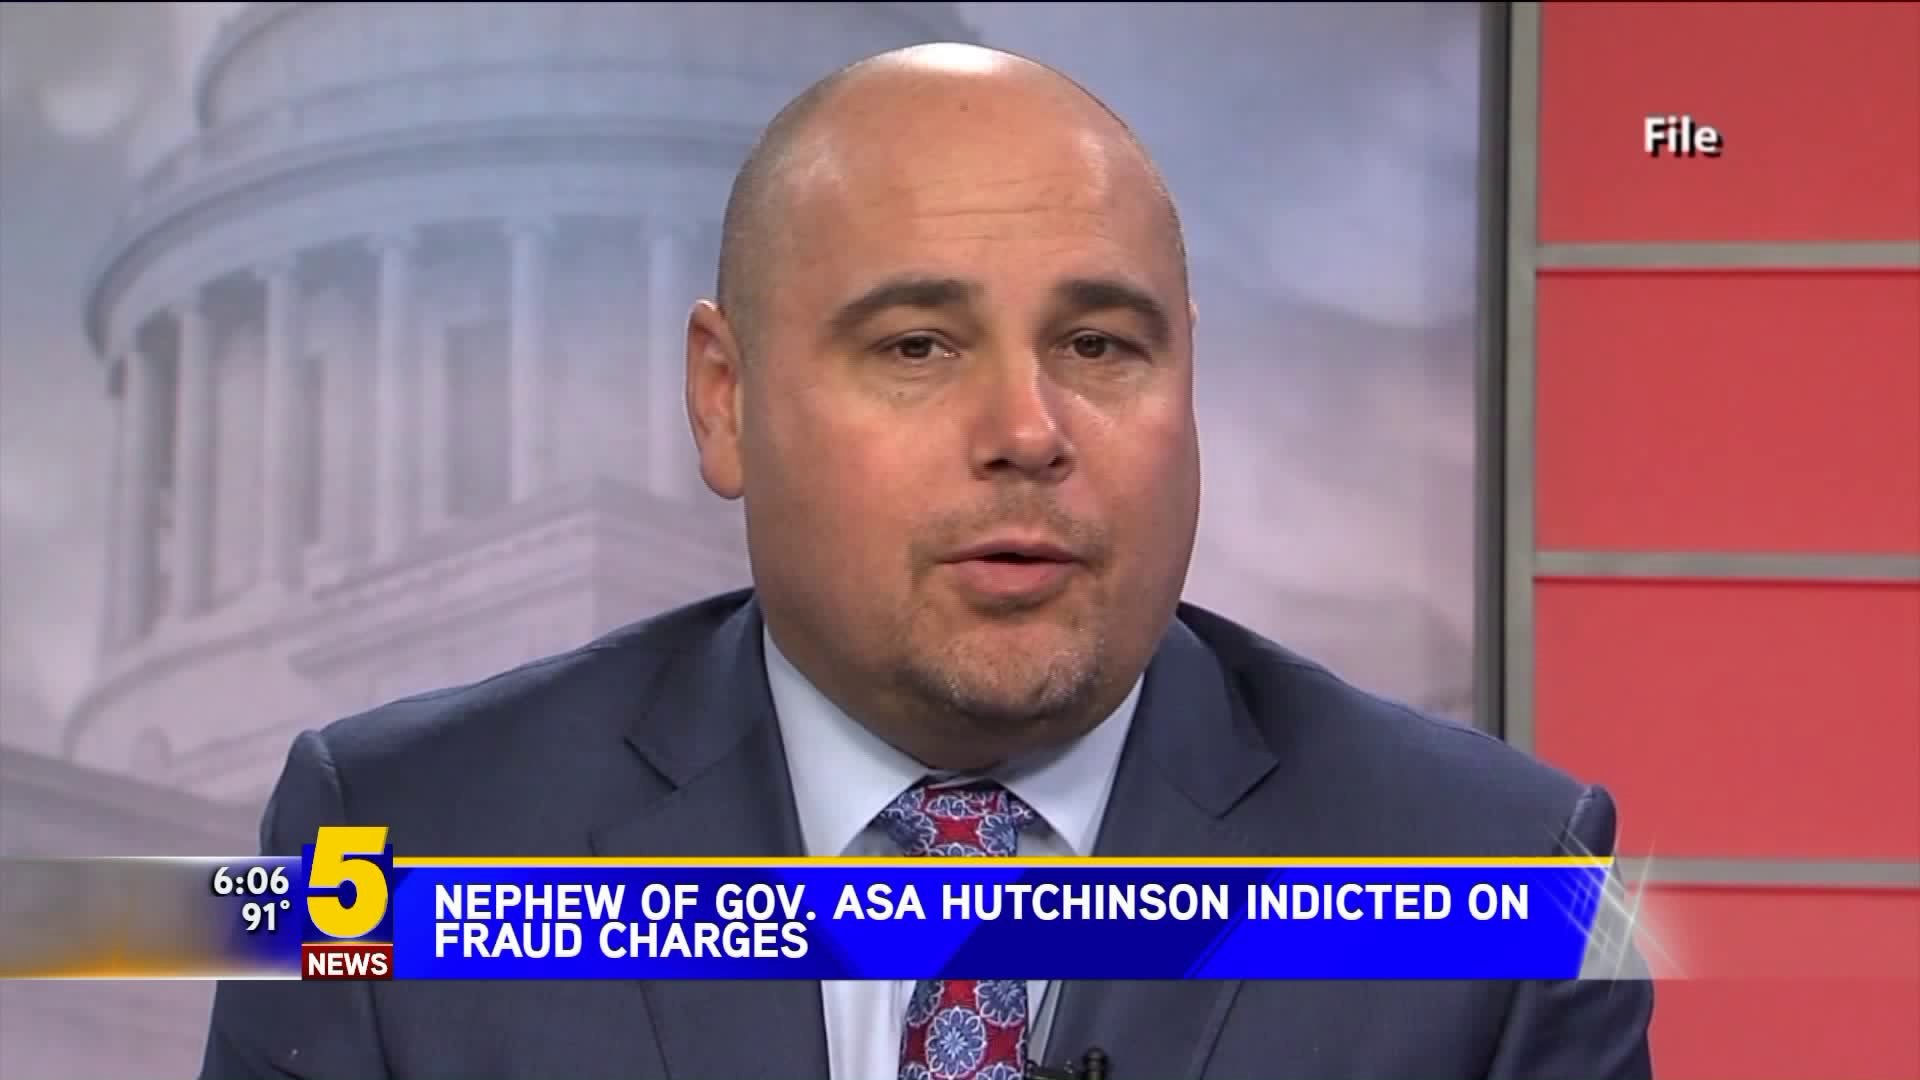 Nephew Of Gov. Asas Hutchinson Indicted On Fraud Charges